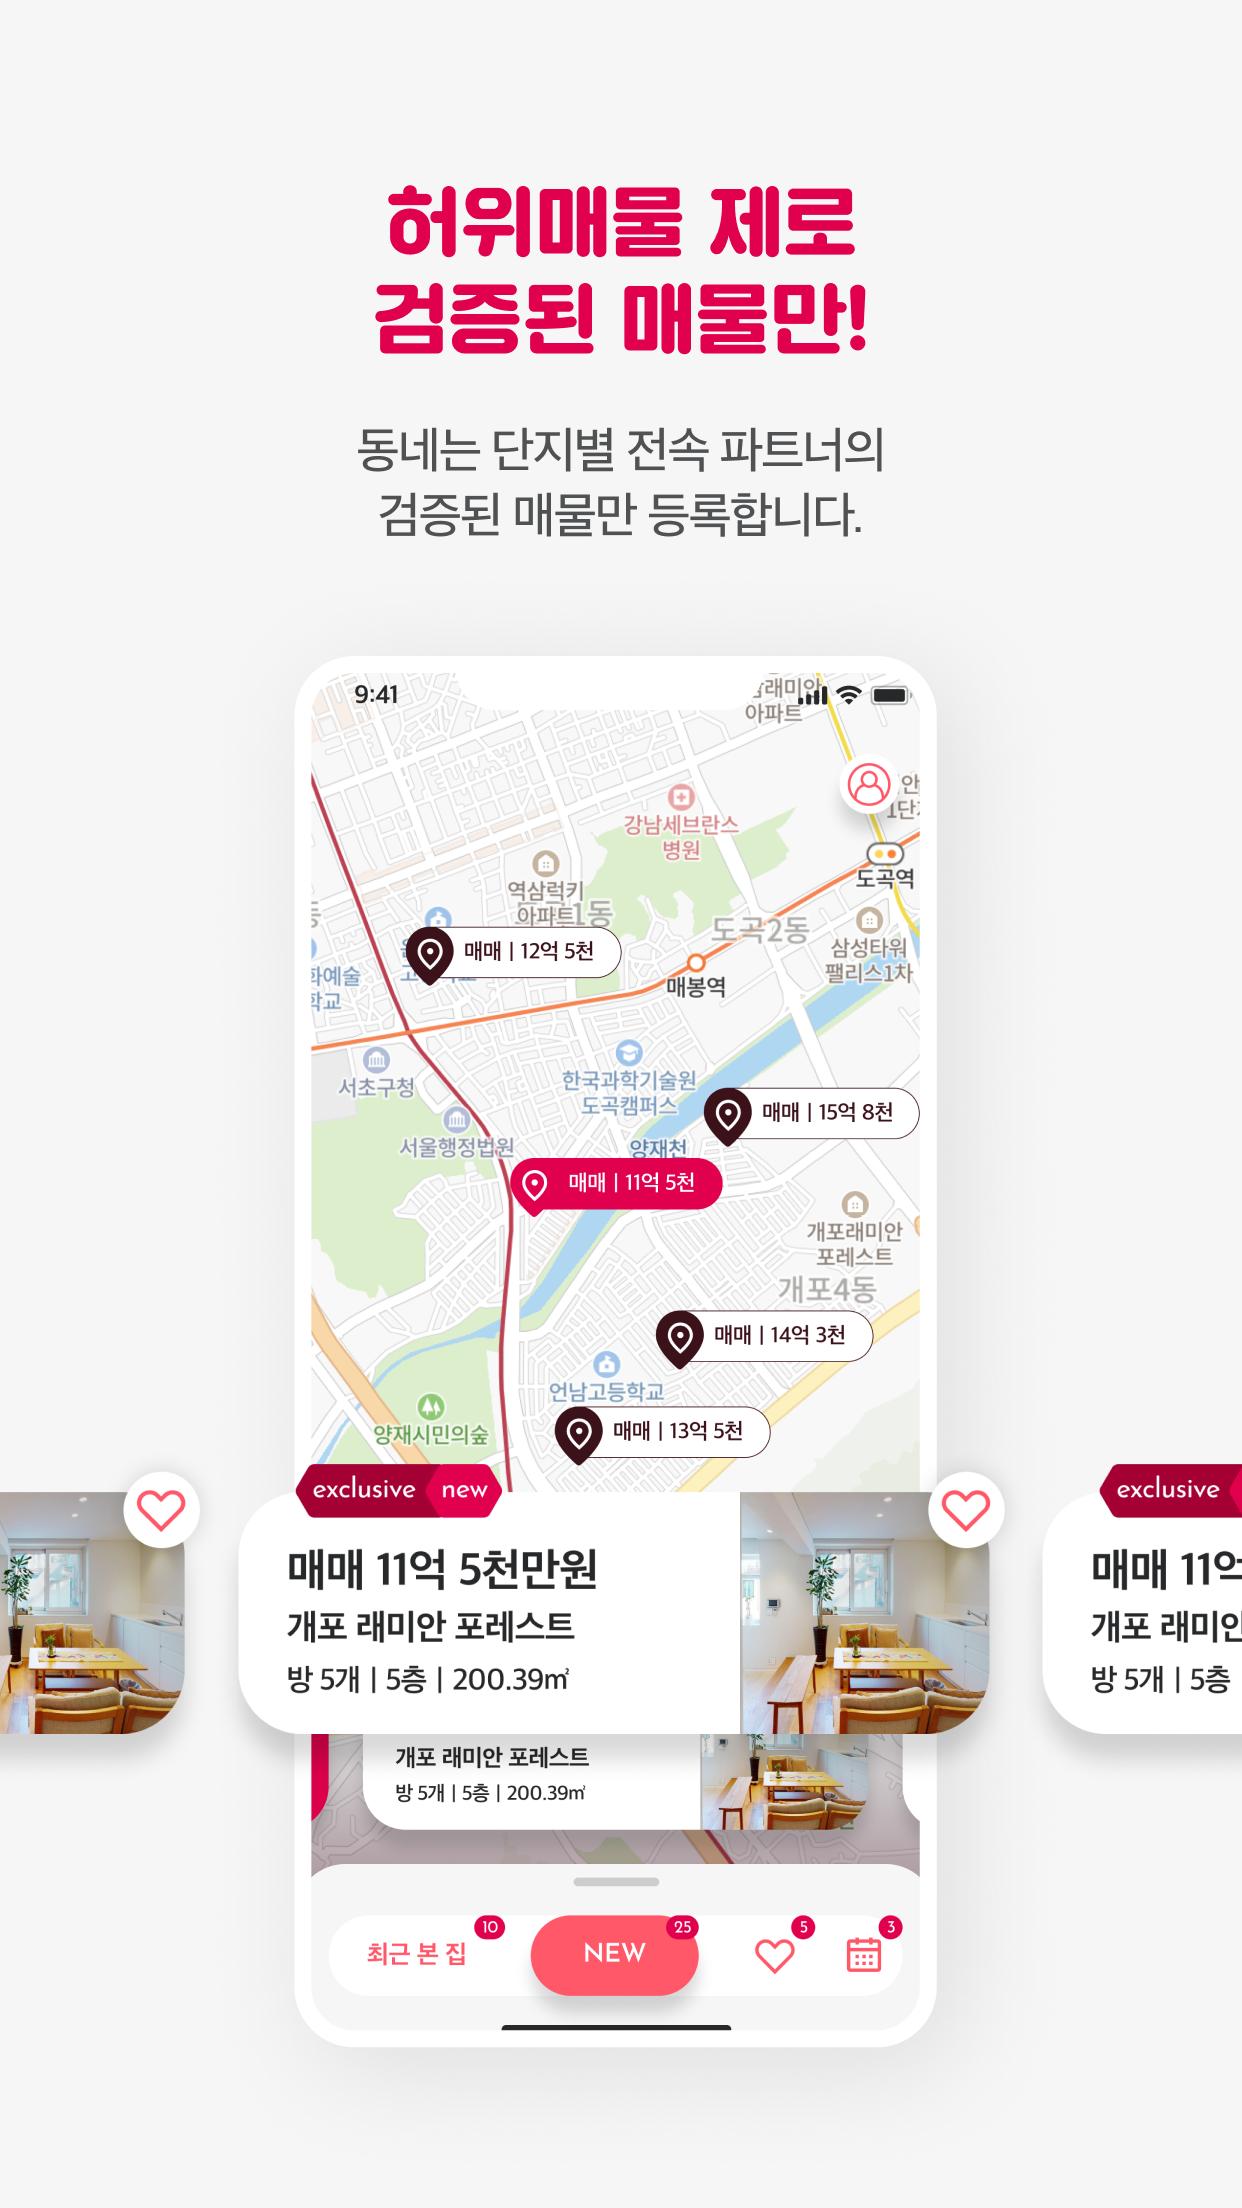 Dongnae Real Estate: Find Your Home 1.0.2 Screenshot 13